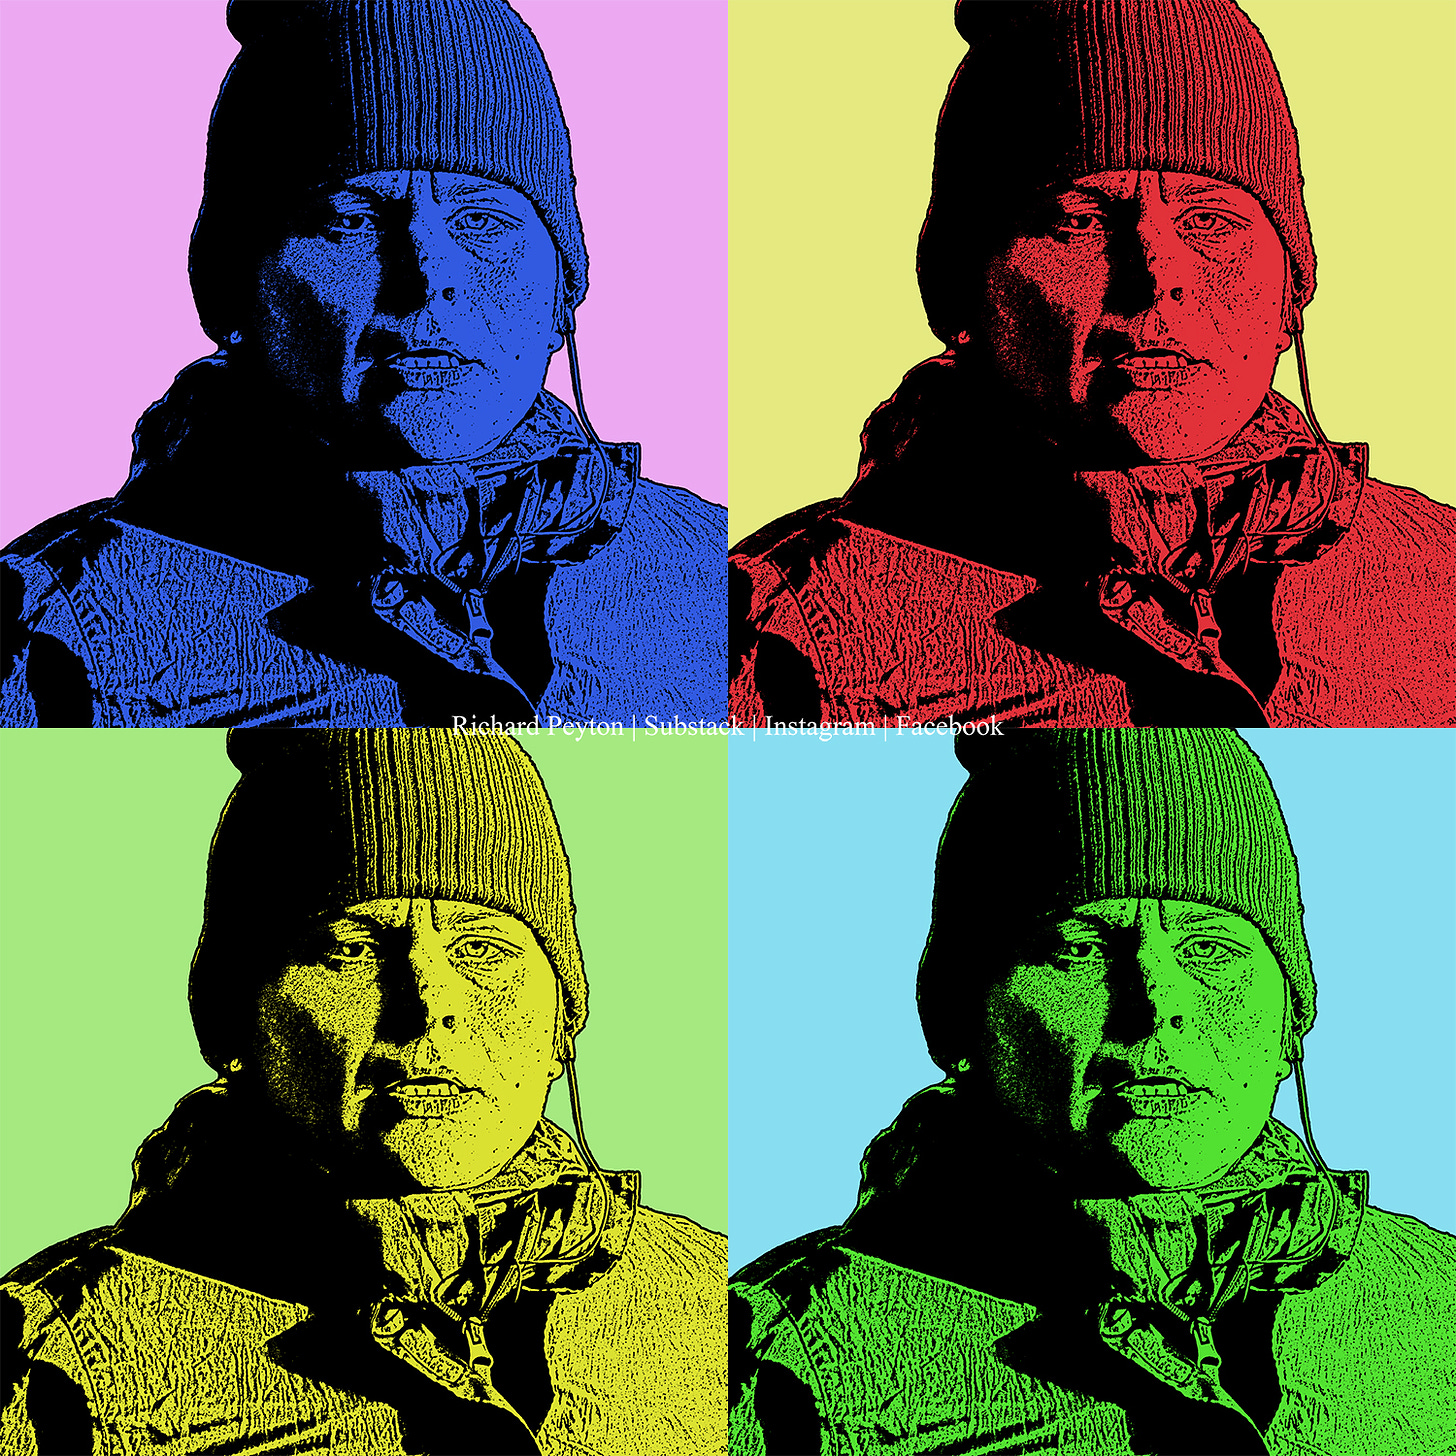 Ultrarunner Paula Wright in a 24 hour in Tralee in 2016. The picture has a headshot of her in blue, red, yellow, and green, in a kind of Andy Warhol style. The picture was taken by photographer and writer Richard Peyton.